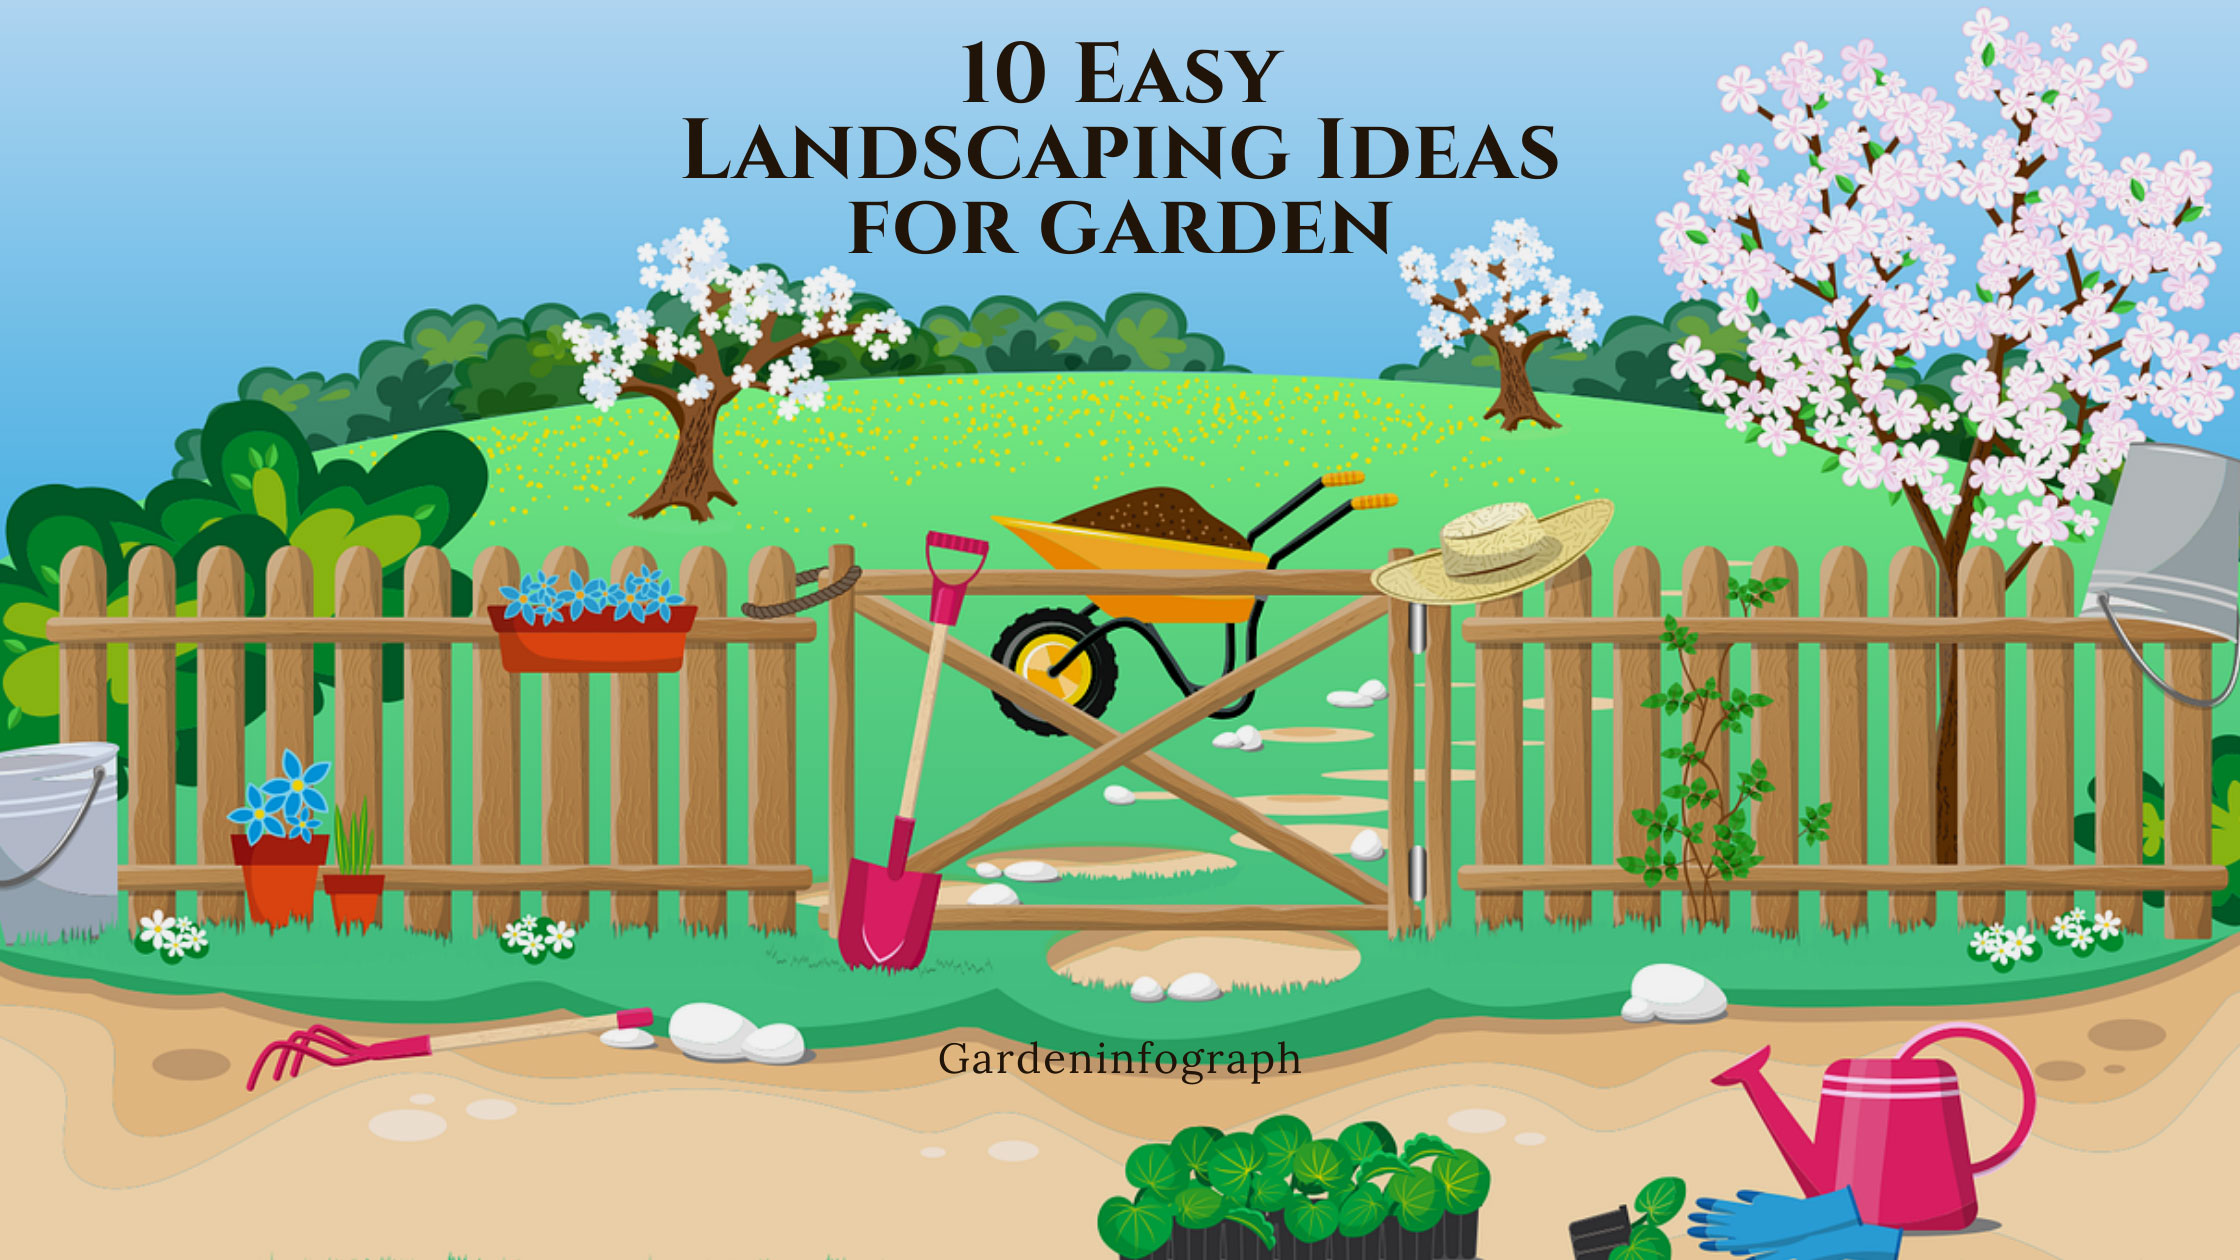 Easy landscaping ideas